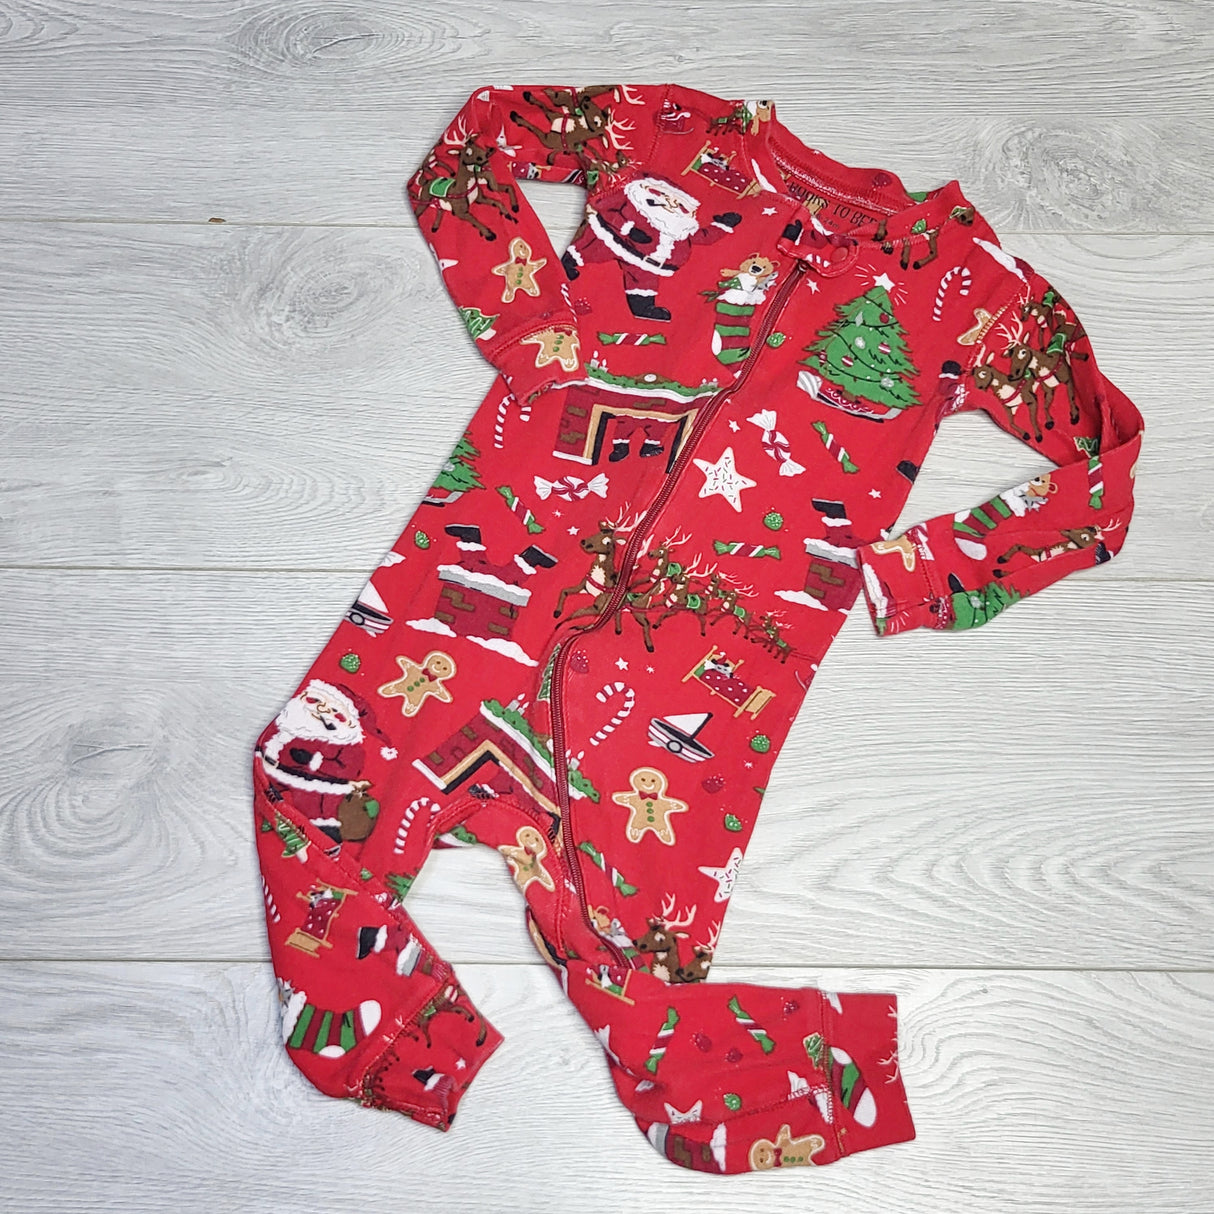 HWIL1 - Books to Bed (Hatley) red zippered Christmas themed cotton sleeper. Size 18-24 months